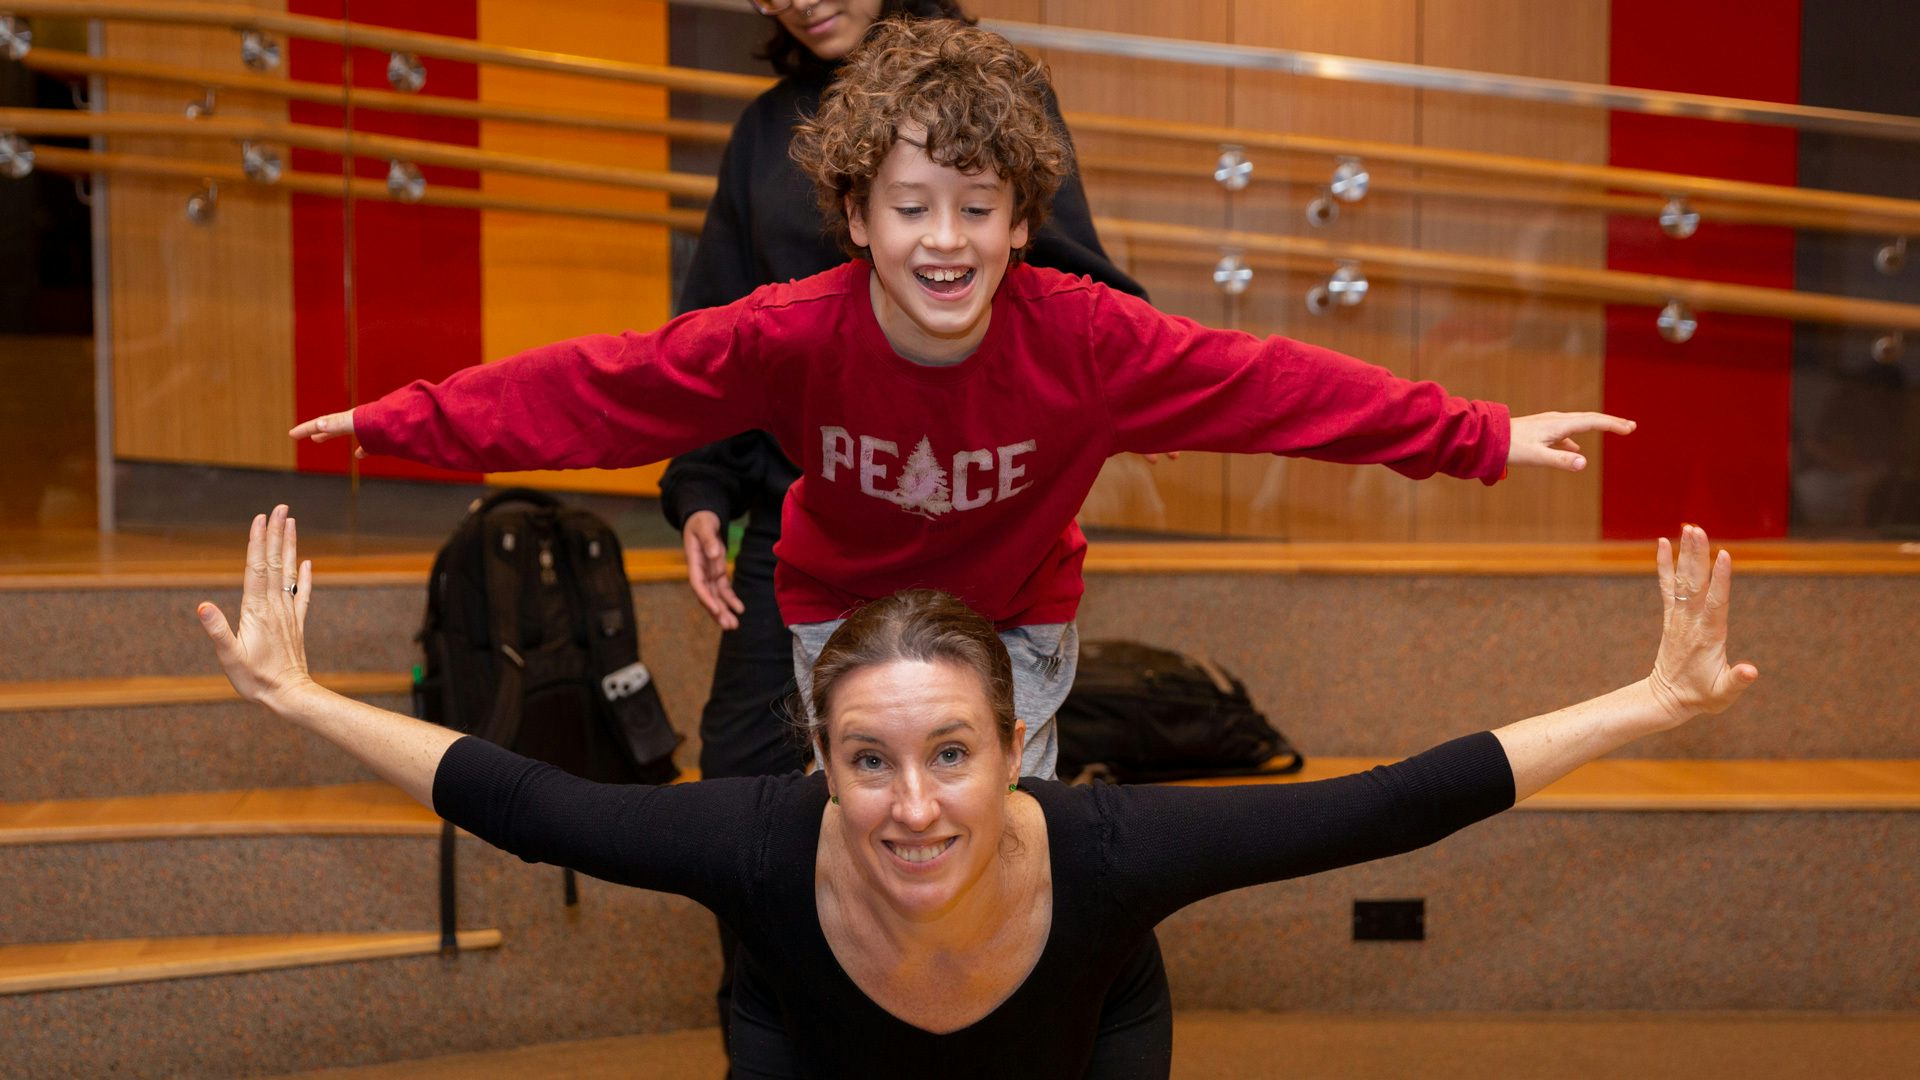 A boy wearing a red shirt balances on his knees while on top of a woman's back. Both have their arms out as if imitating an airplane.